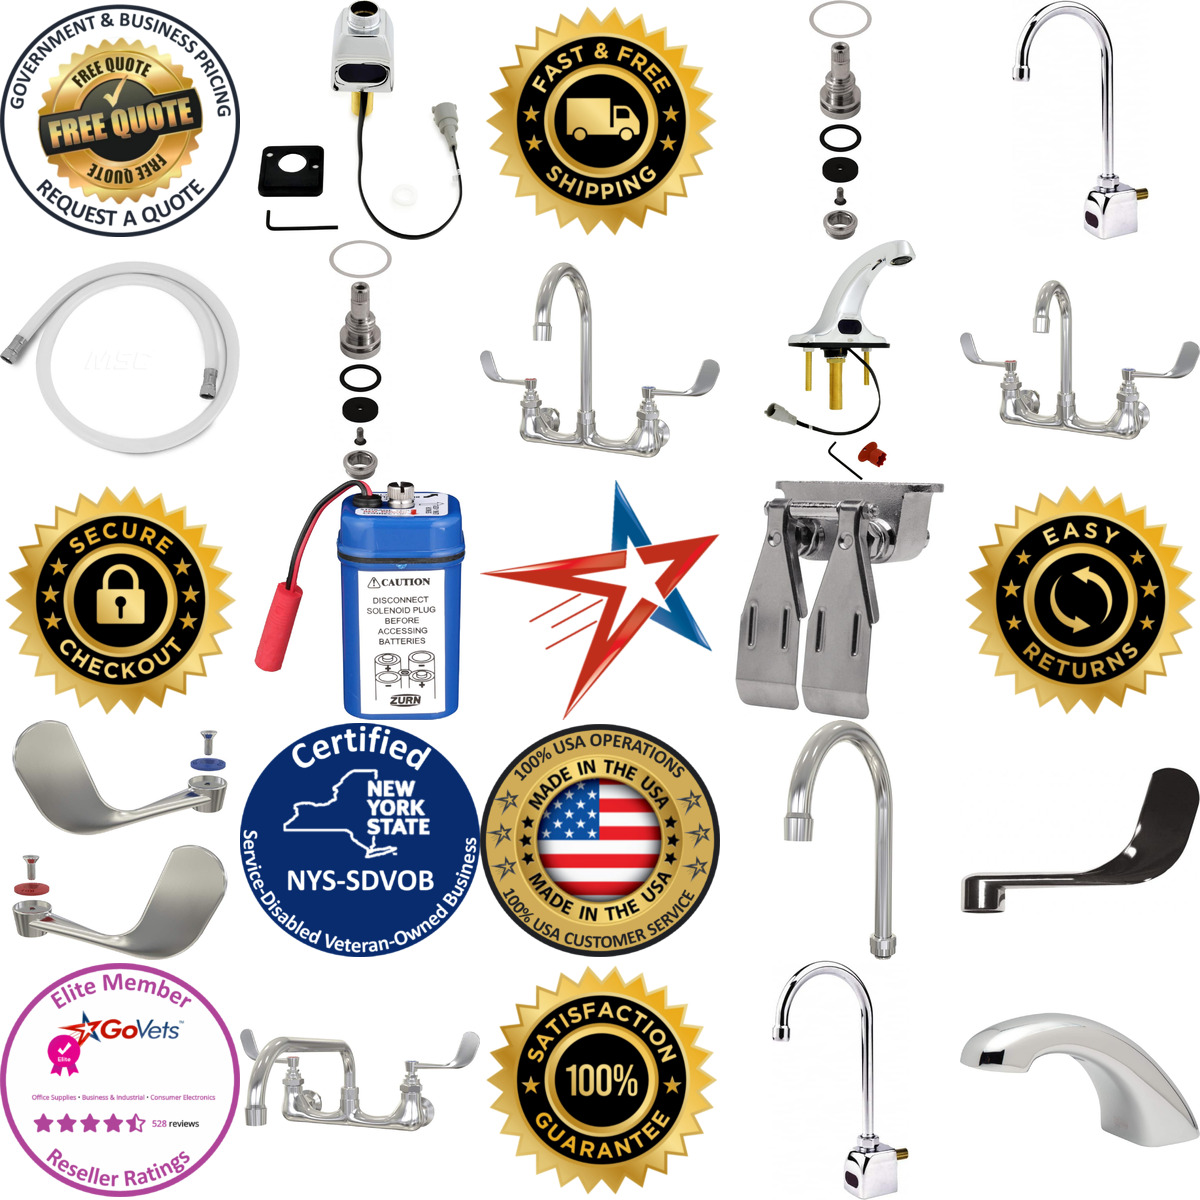 A selection of Sinks products on GoVets